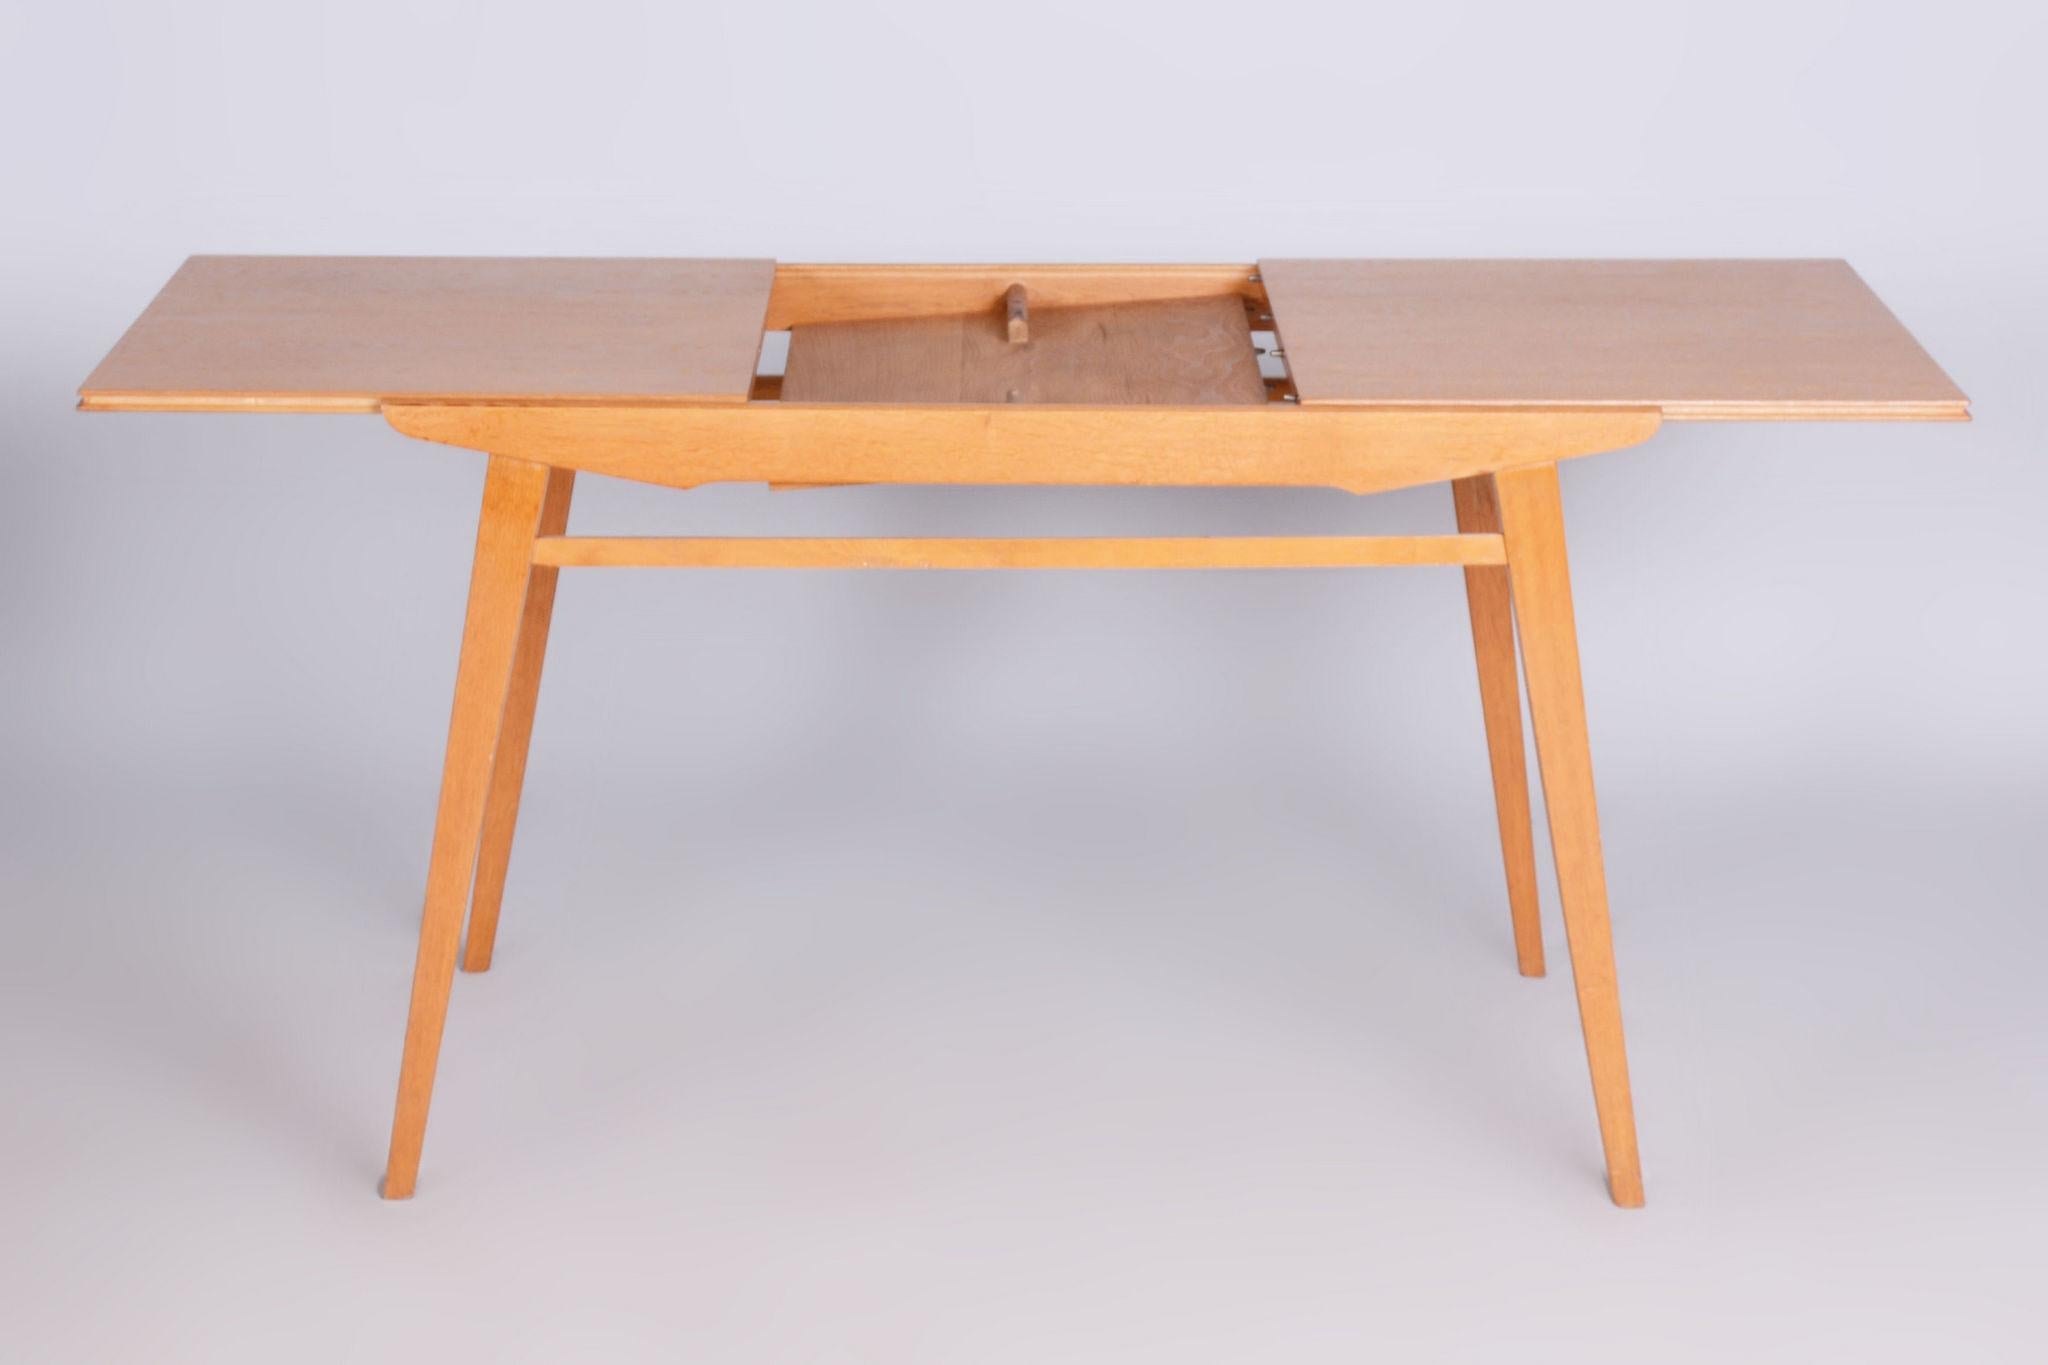 Restored Midcentury Oak Extendable Dining Table, Revived Polish, Czechia, 1950s For Sale 6